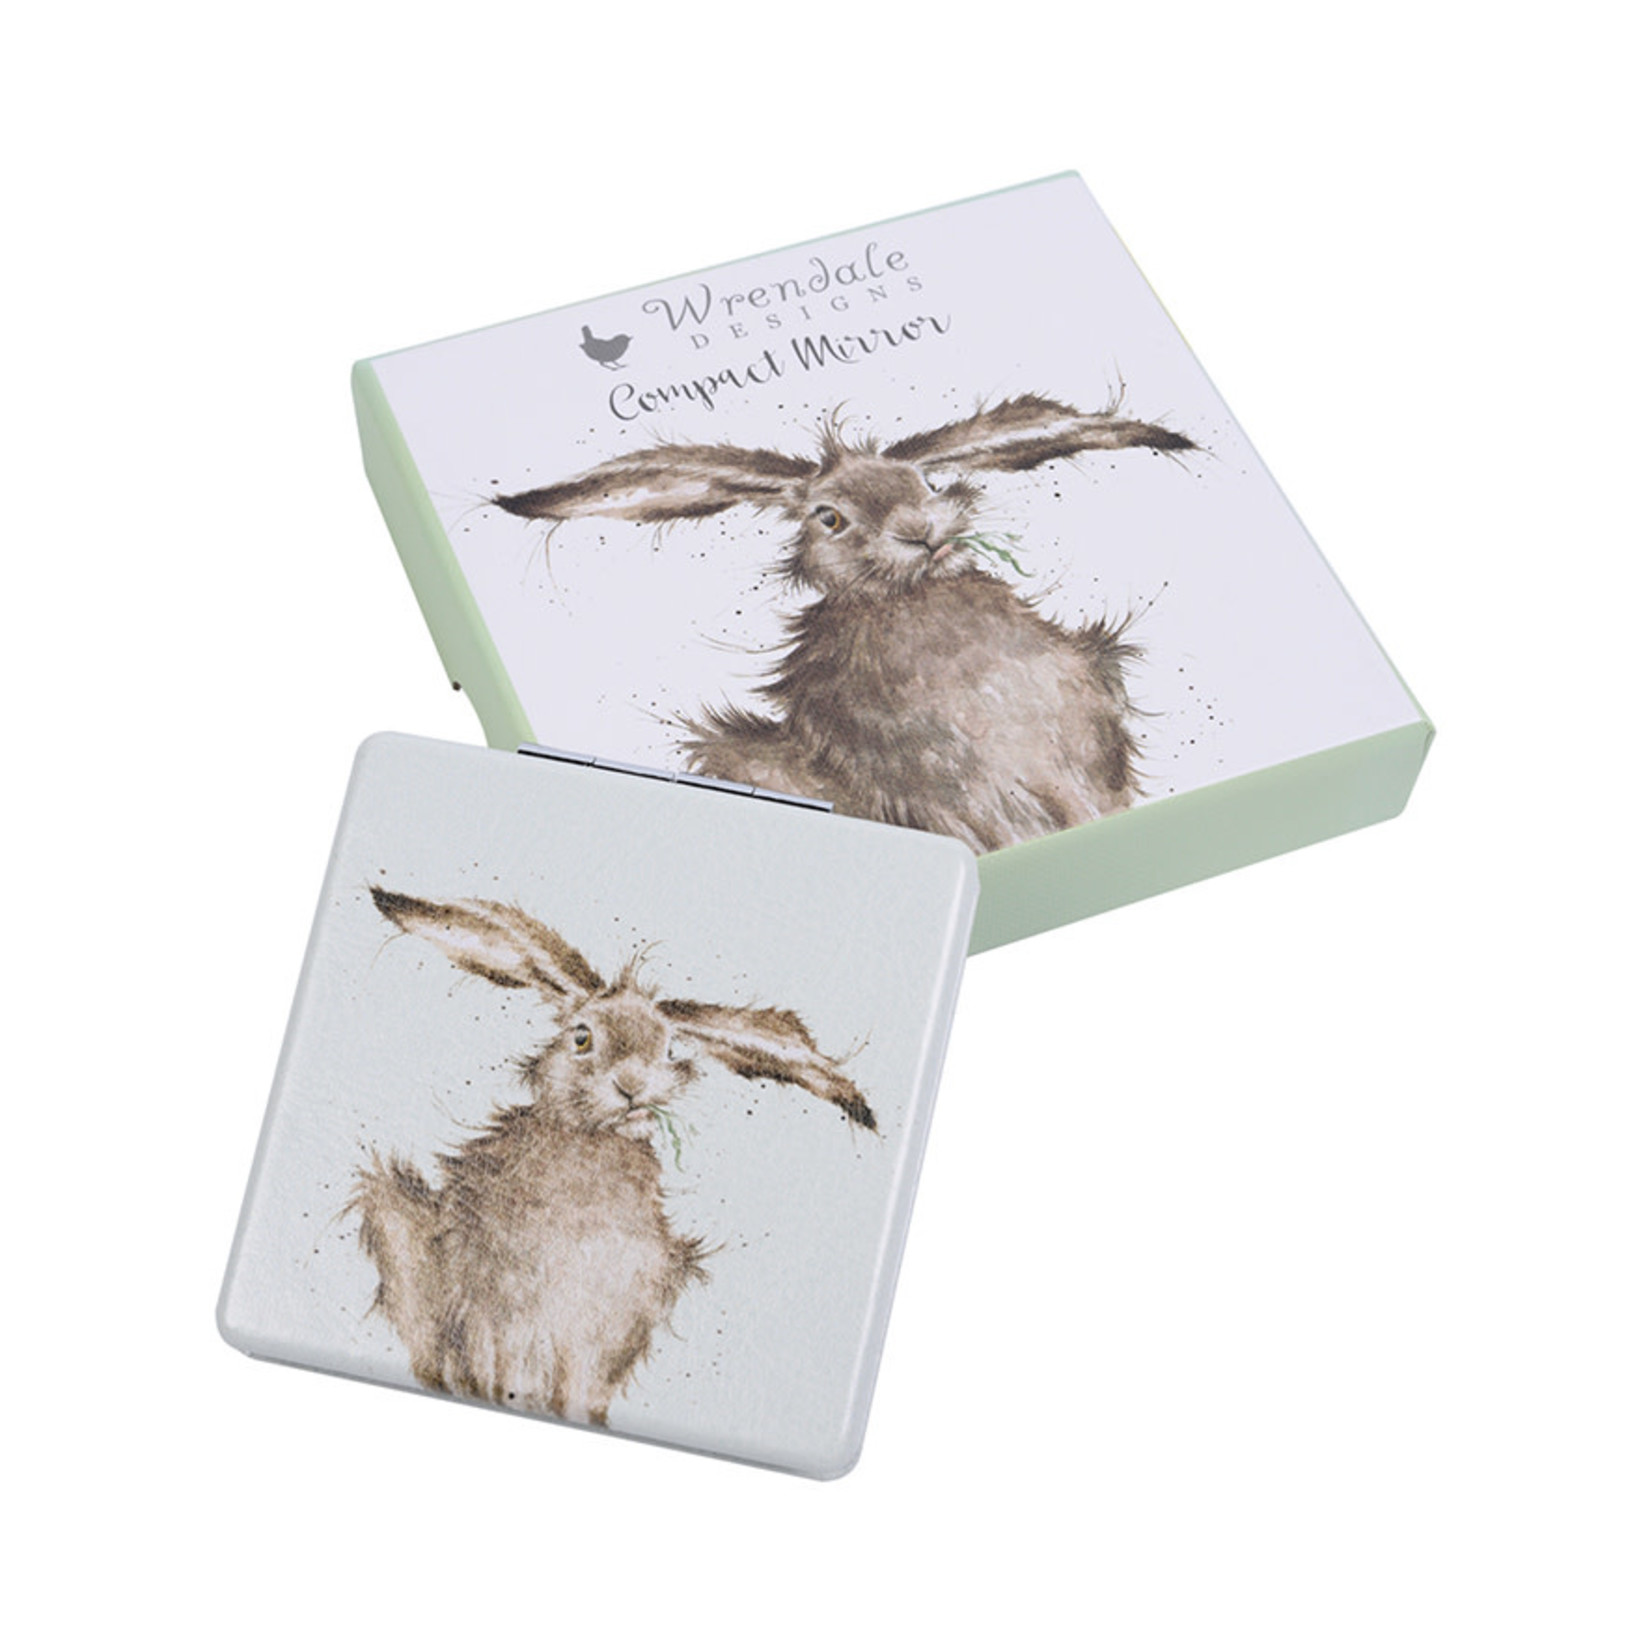 Wrendale Designs MR008 Compact Mirror - 'Hare-Brained' Hare